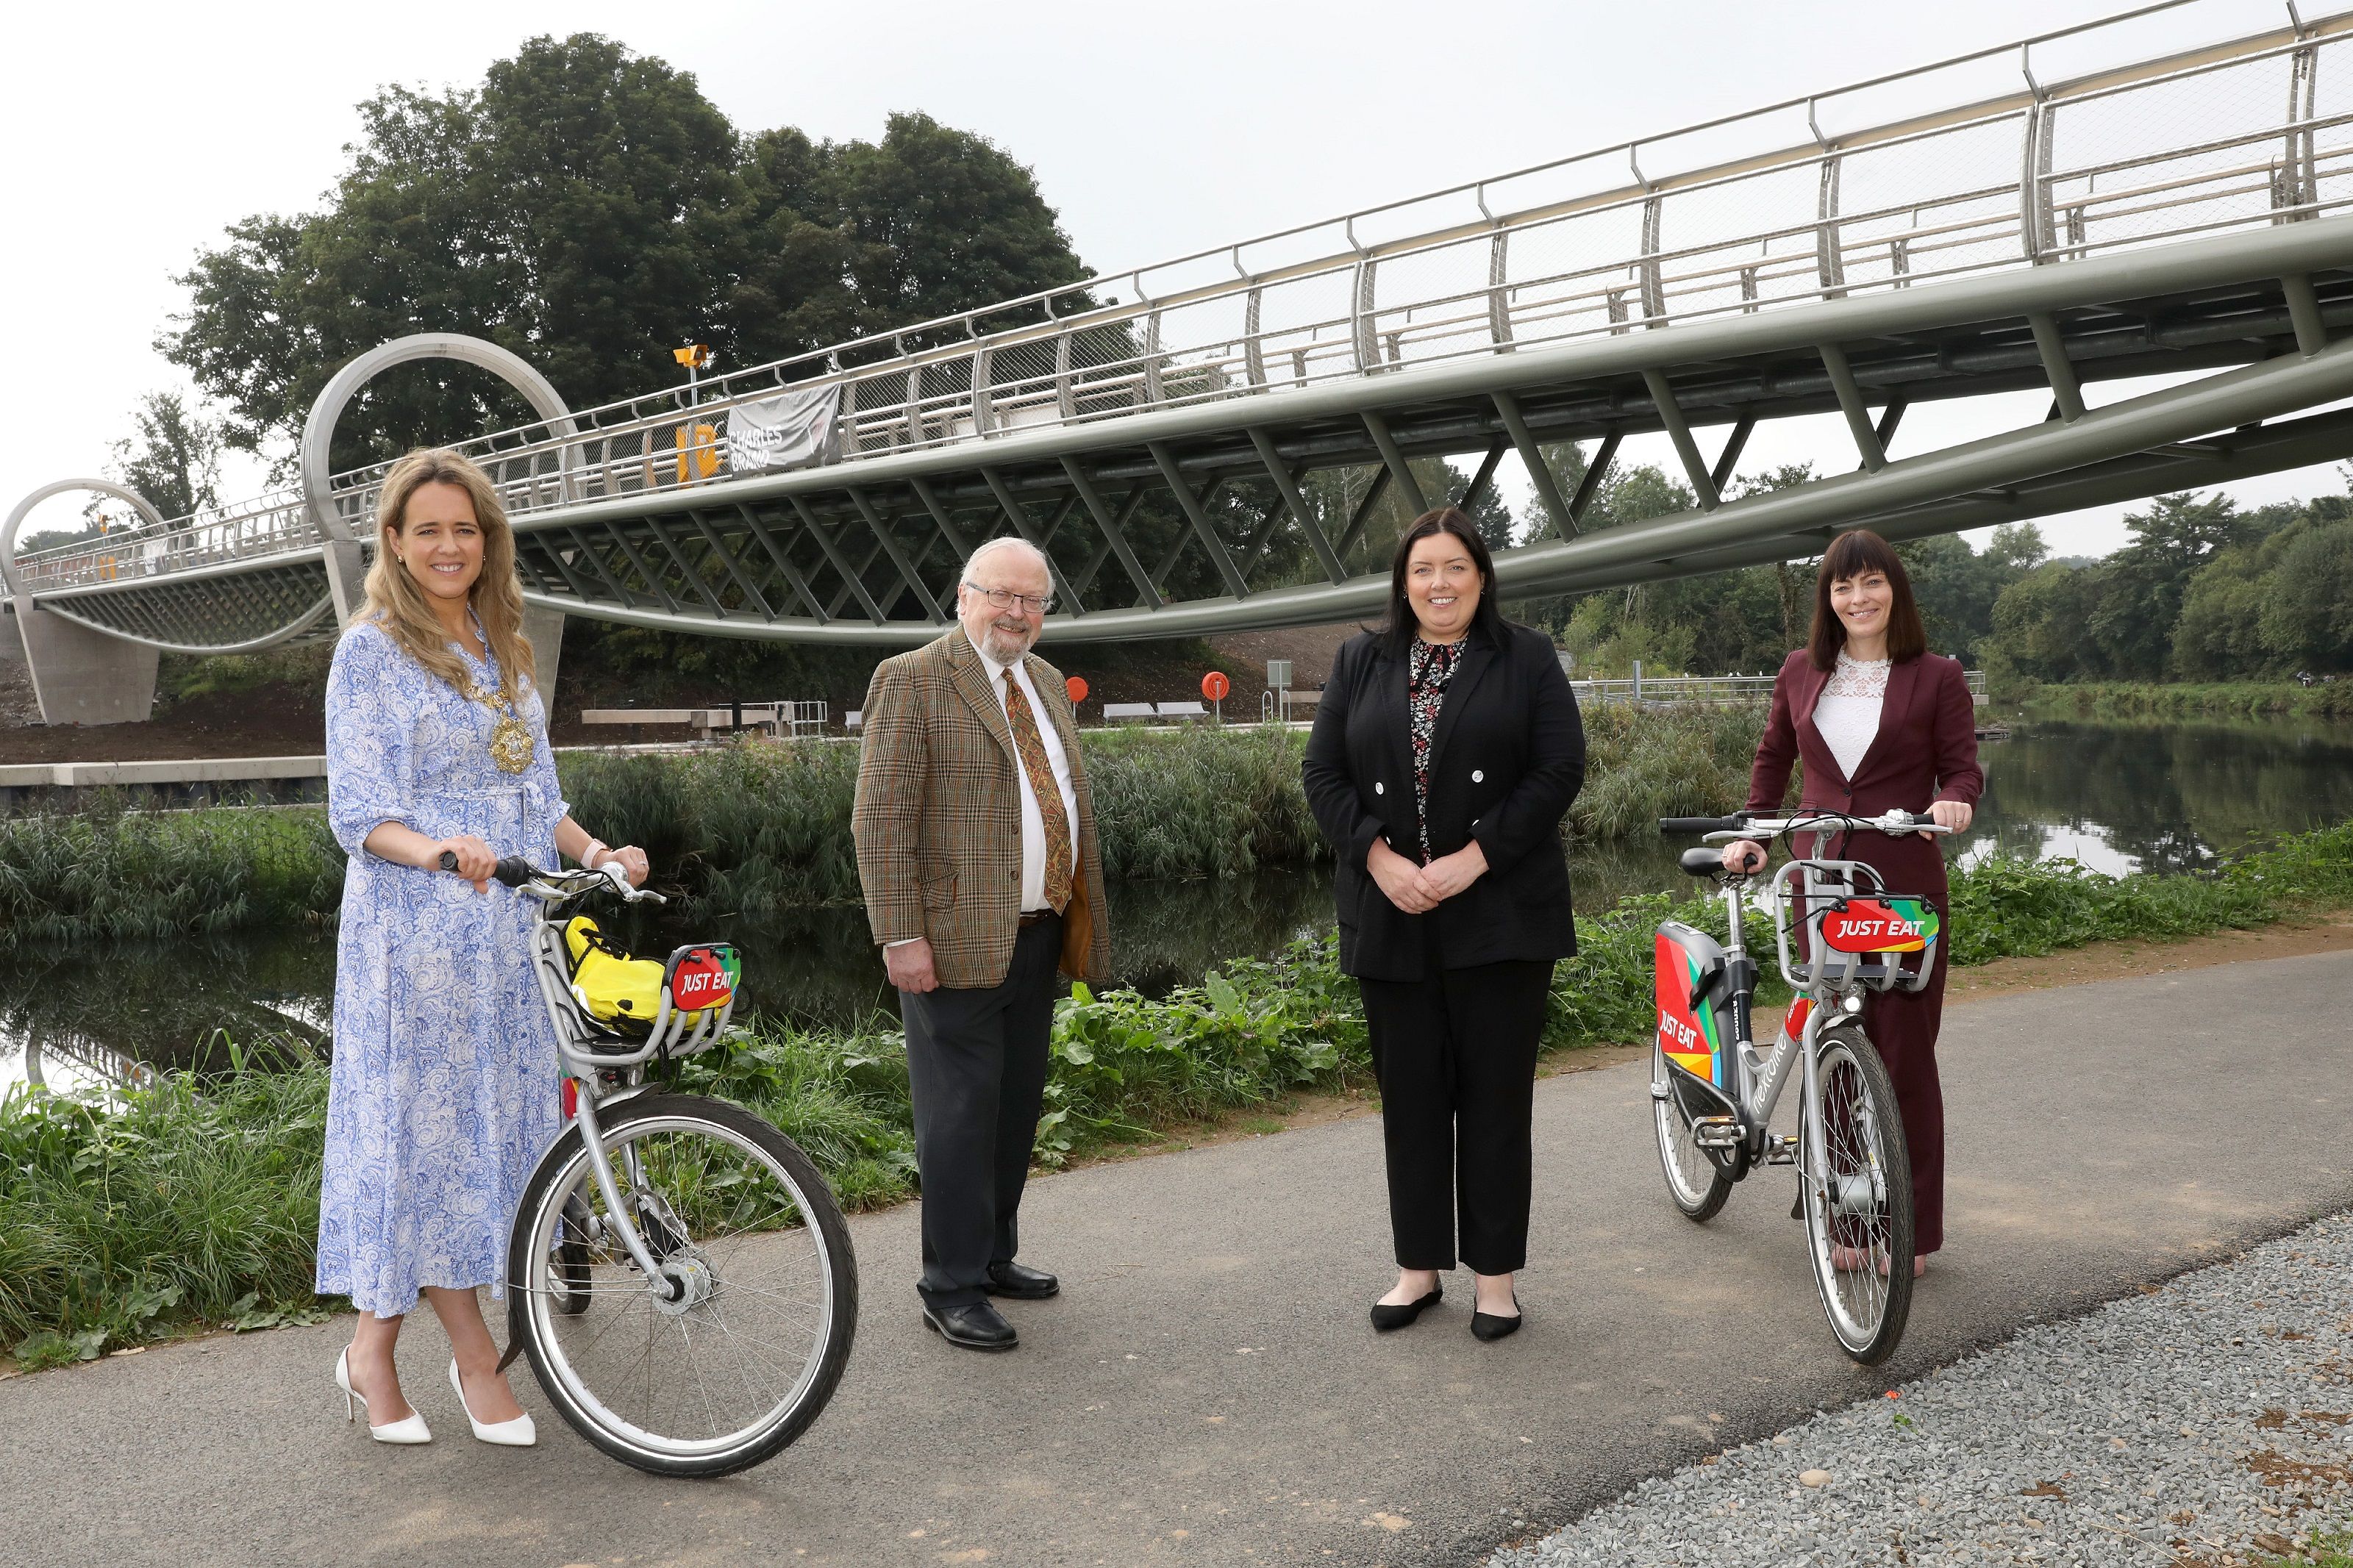 NEW BRIDGE WELCOME: Communities Minister Deirdre Hargey, Infrastructure Minister Nichola Mallon, Lord Mayor Councillor Kate Nicholl and Erskine Holmes from Urban Villages 